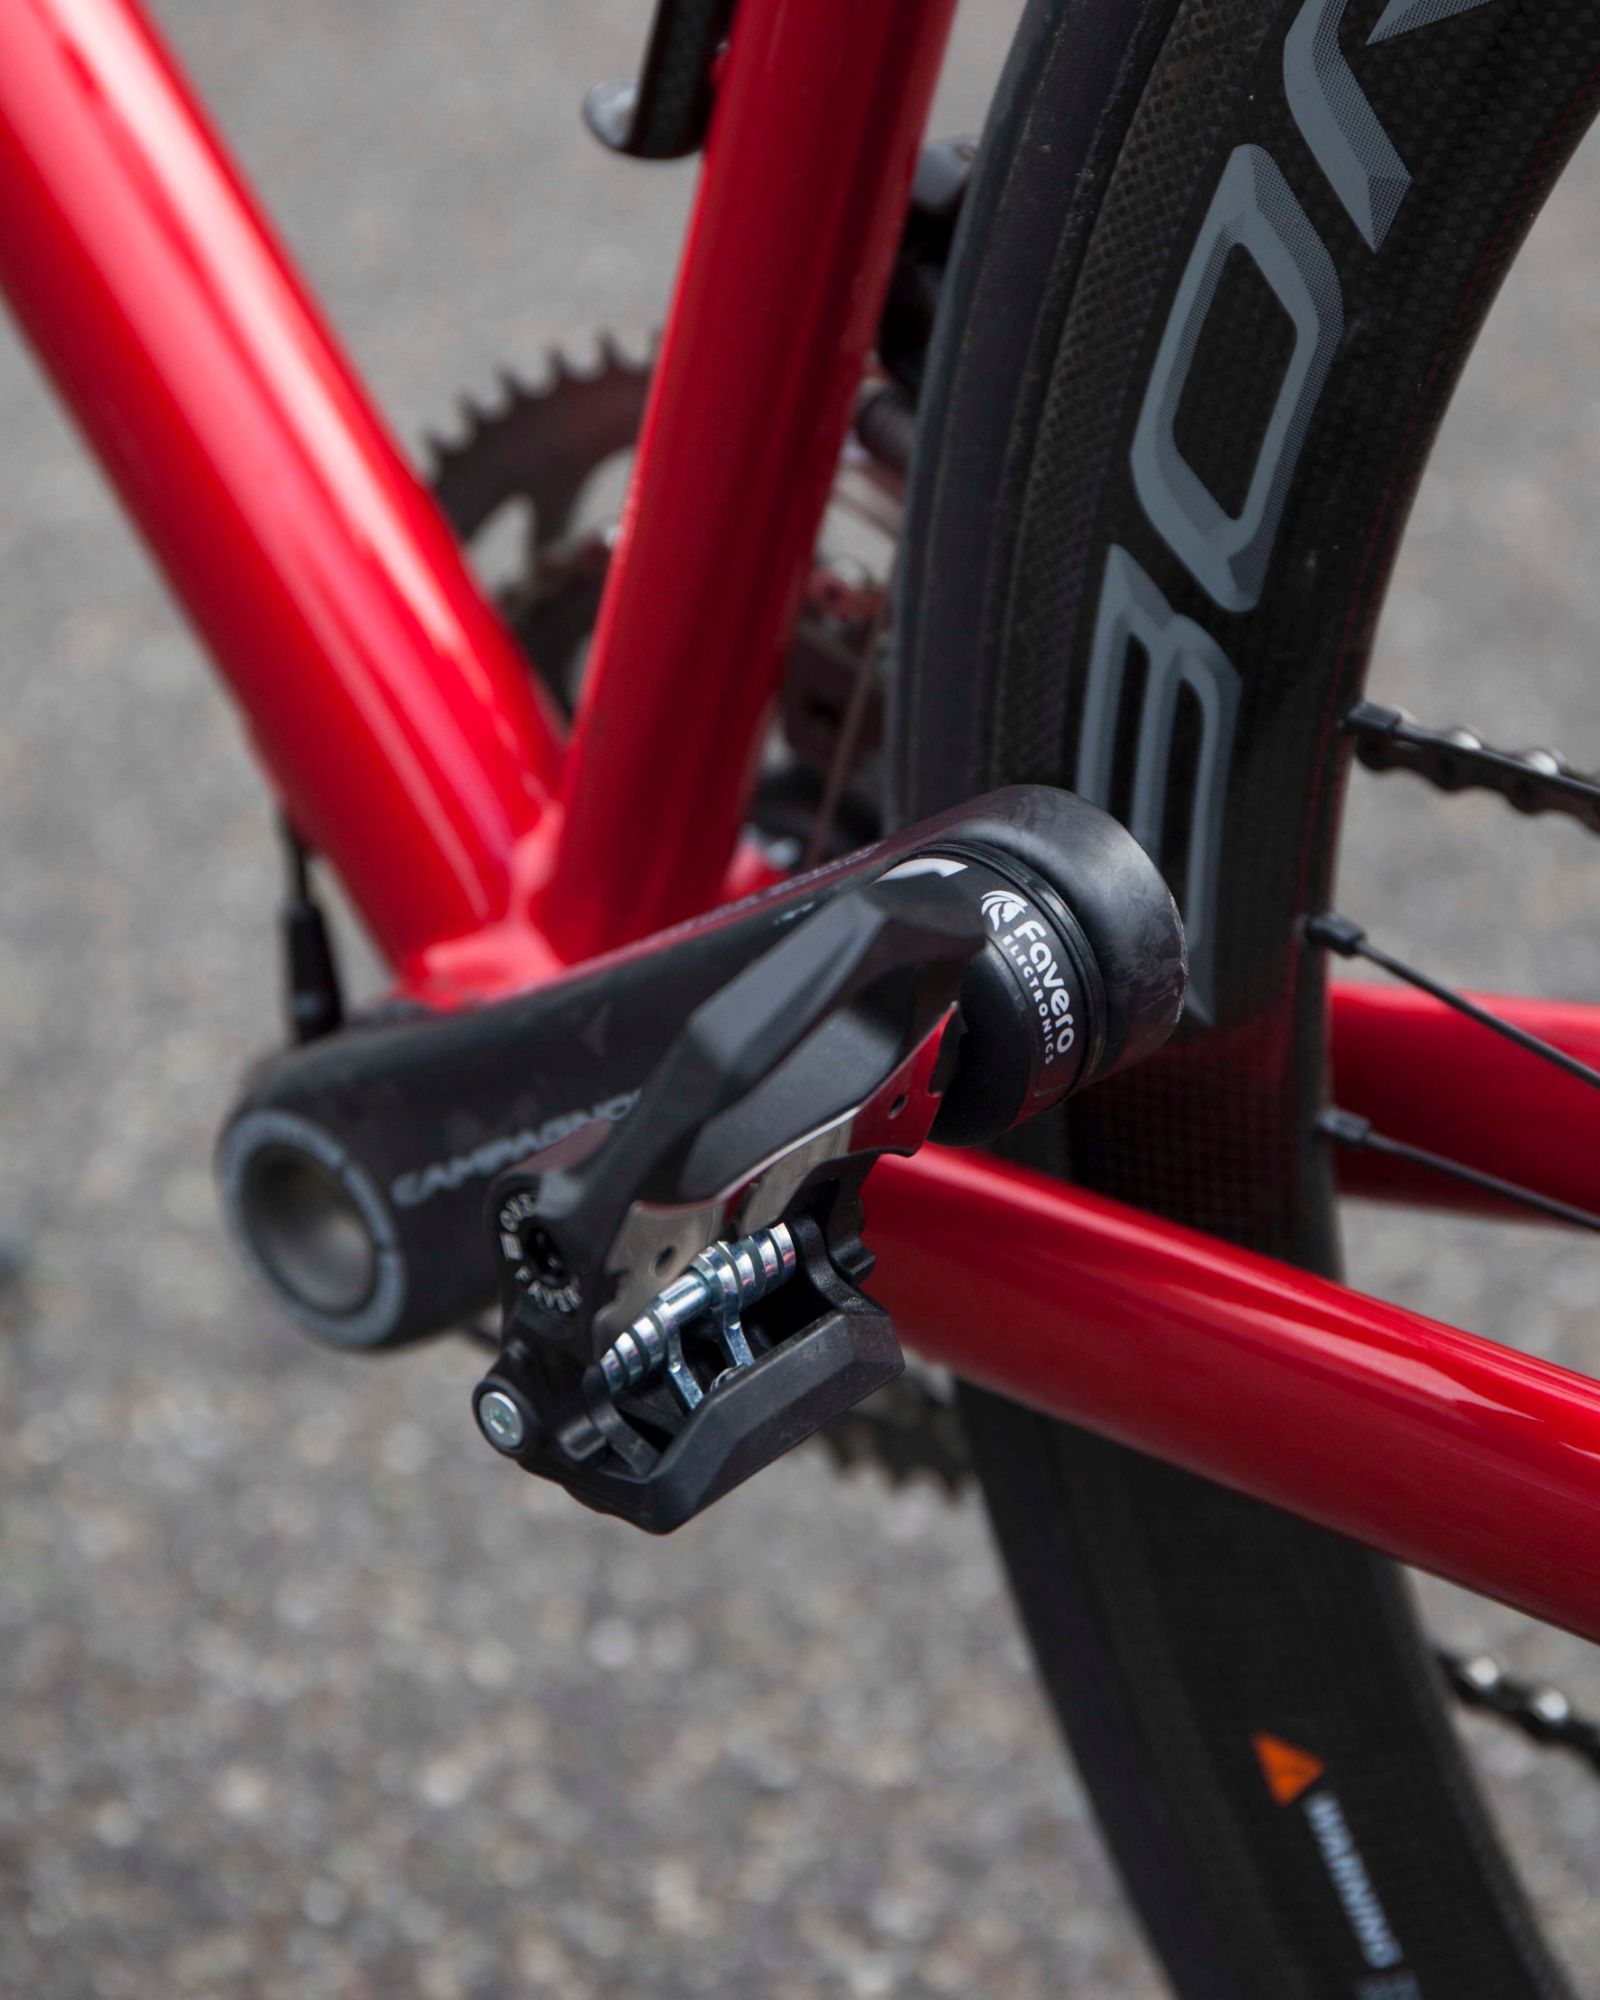 Favero Assioma Duo Power Meter Pedal Review